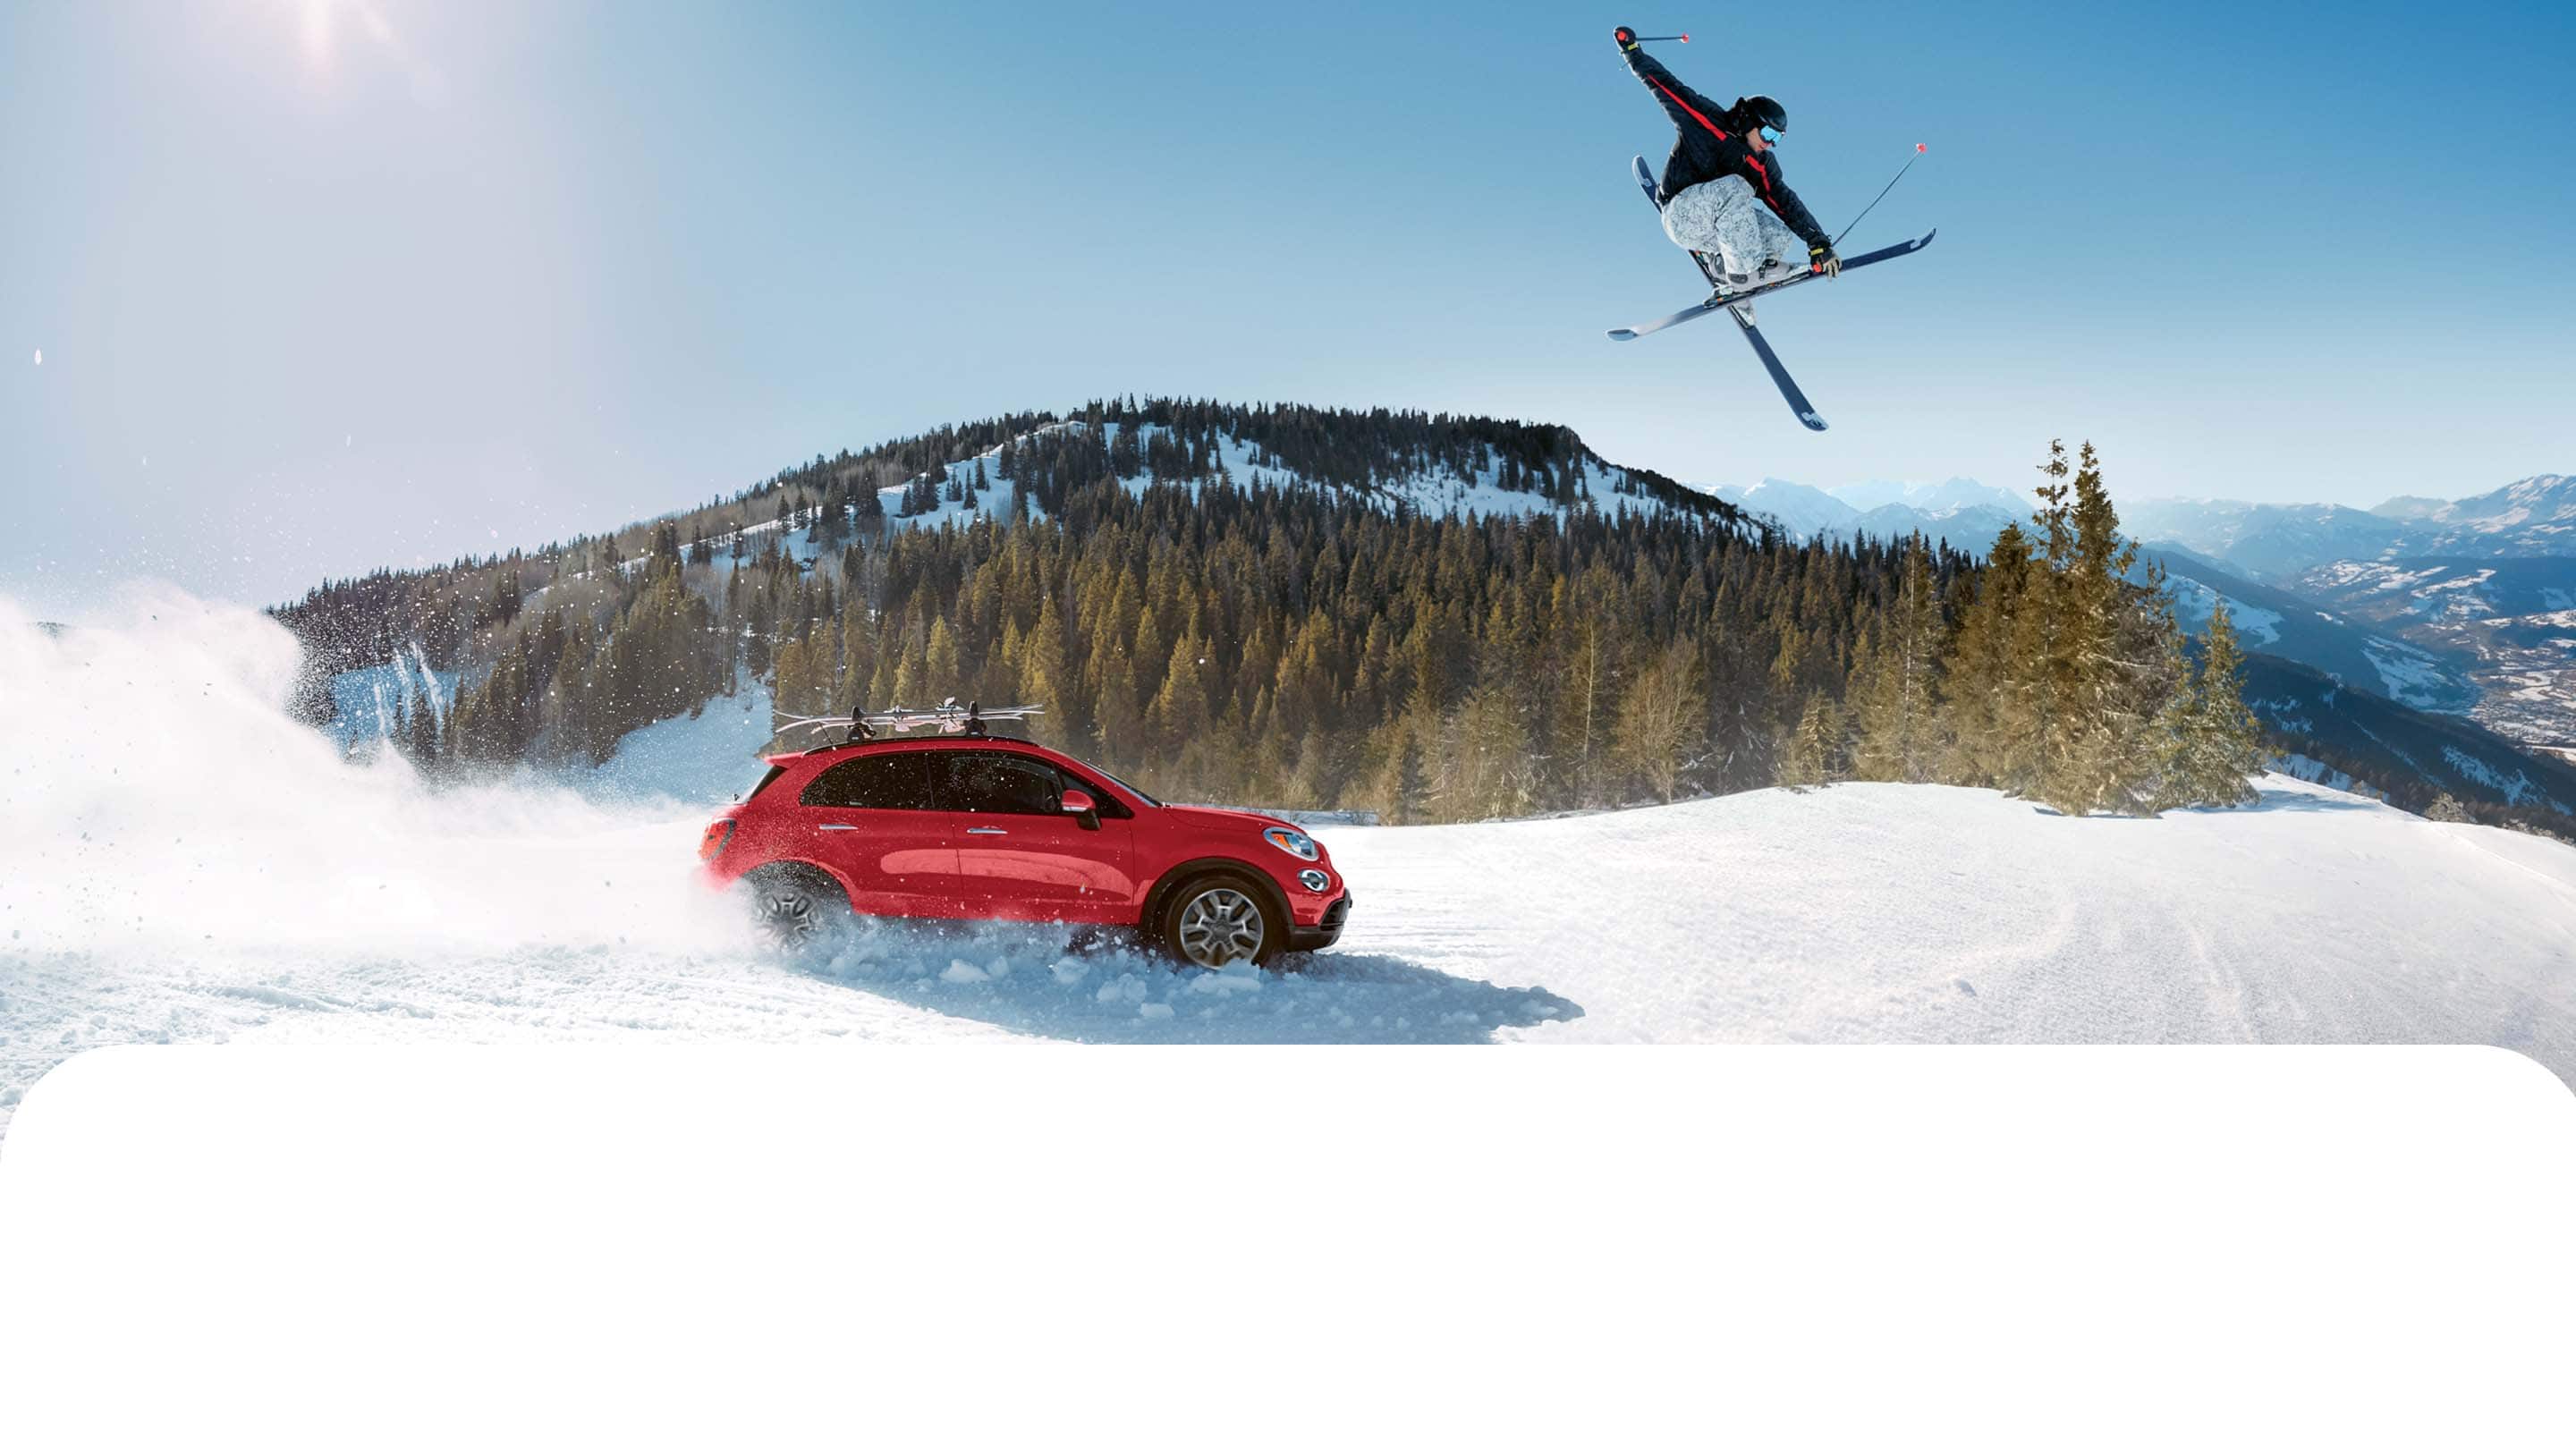 A passenger-side profile of a red 2022 Fiat 500X Trekking with aftermarket equipment, being driven through heavy snow, kicking up the white powder as it goes, while a skier jumps overhead and mountains rise in the background.